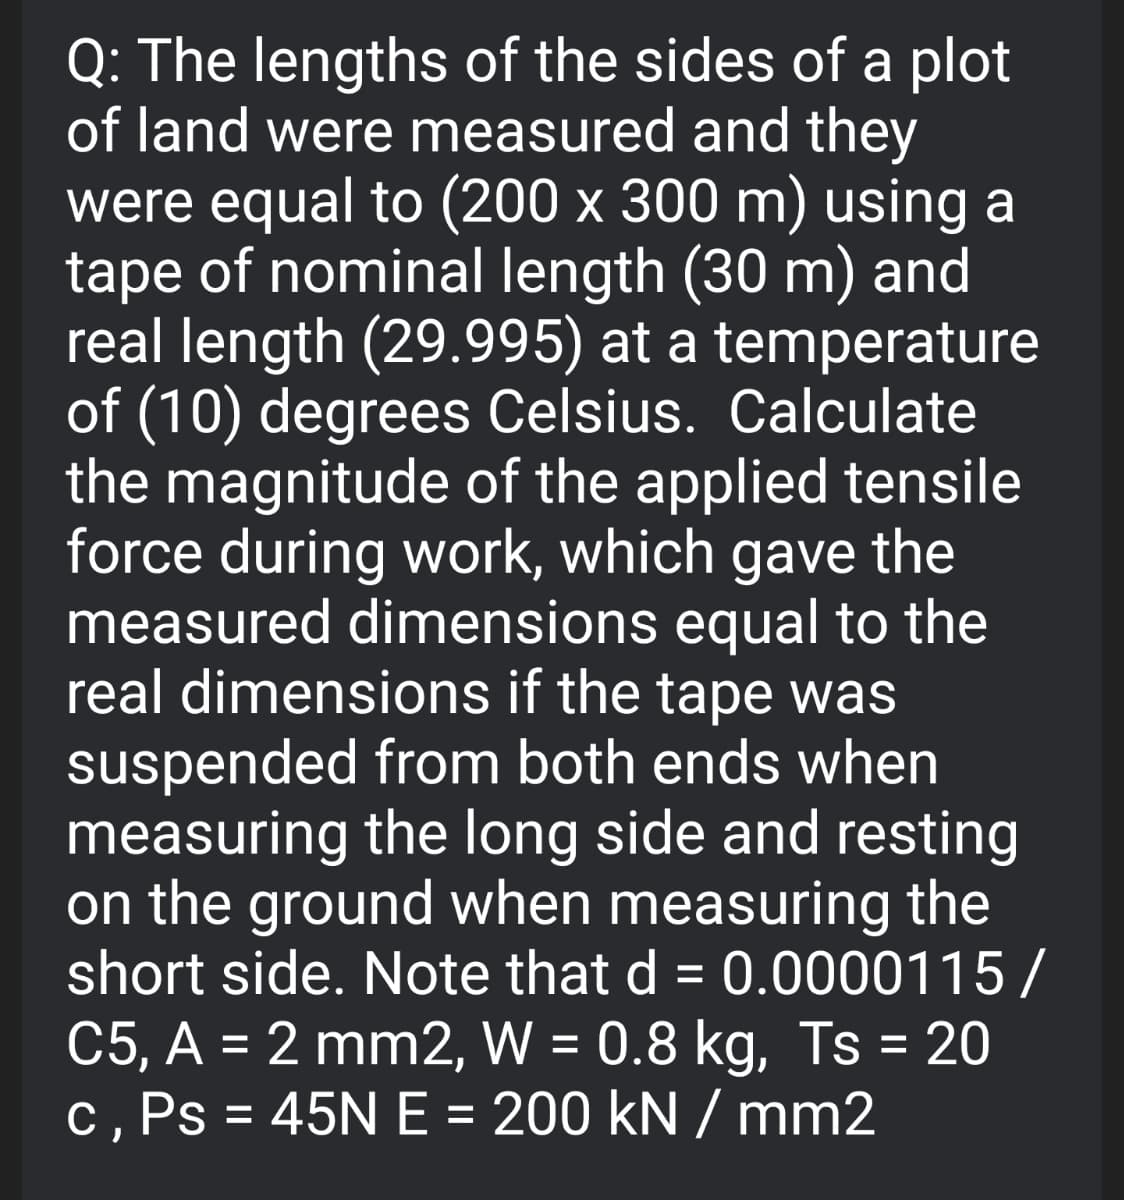 Q: The lengths of the sides of a plot
of land were measured and they
were equal to (200 x 300 m) using a
tape of nominal length (30 m) and
real length (29.995) at a temperature
of (10) degrees Celsius. Calculate
the magnitude of the applied tensile
force during work, which gave the
measured dimensions equal to the
real dimensions if the tape was
suspended from both ends when
measuring the long side and resting
on the ground when measuring the
short side. Note that d = 0.0000115/
C5, A = 2 mm2, W = 0.8 kg, Ts = 20
c, Ps = 45N E = 200 kN / mm2
%3D
%3D
